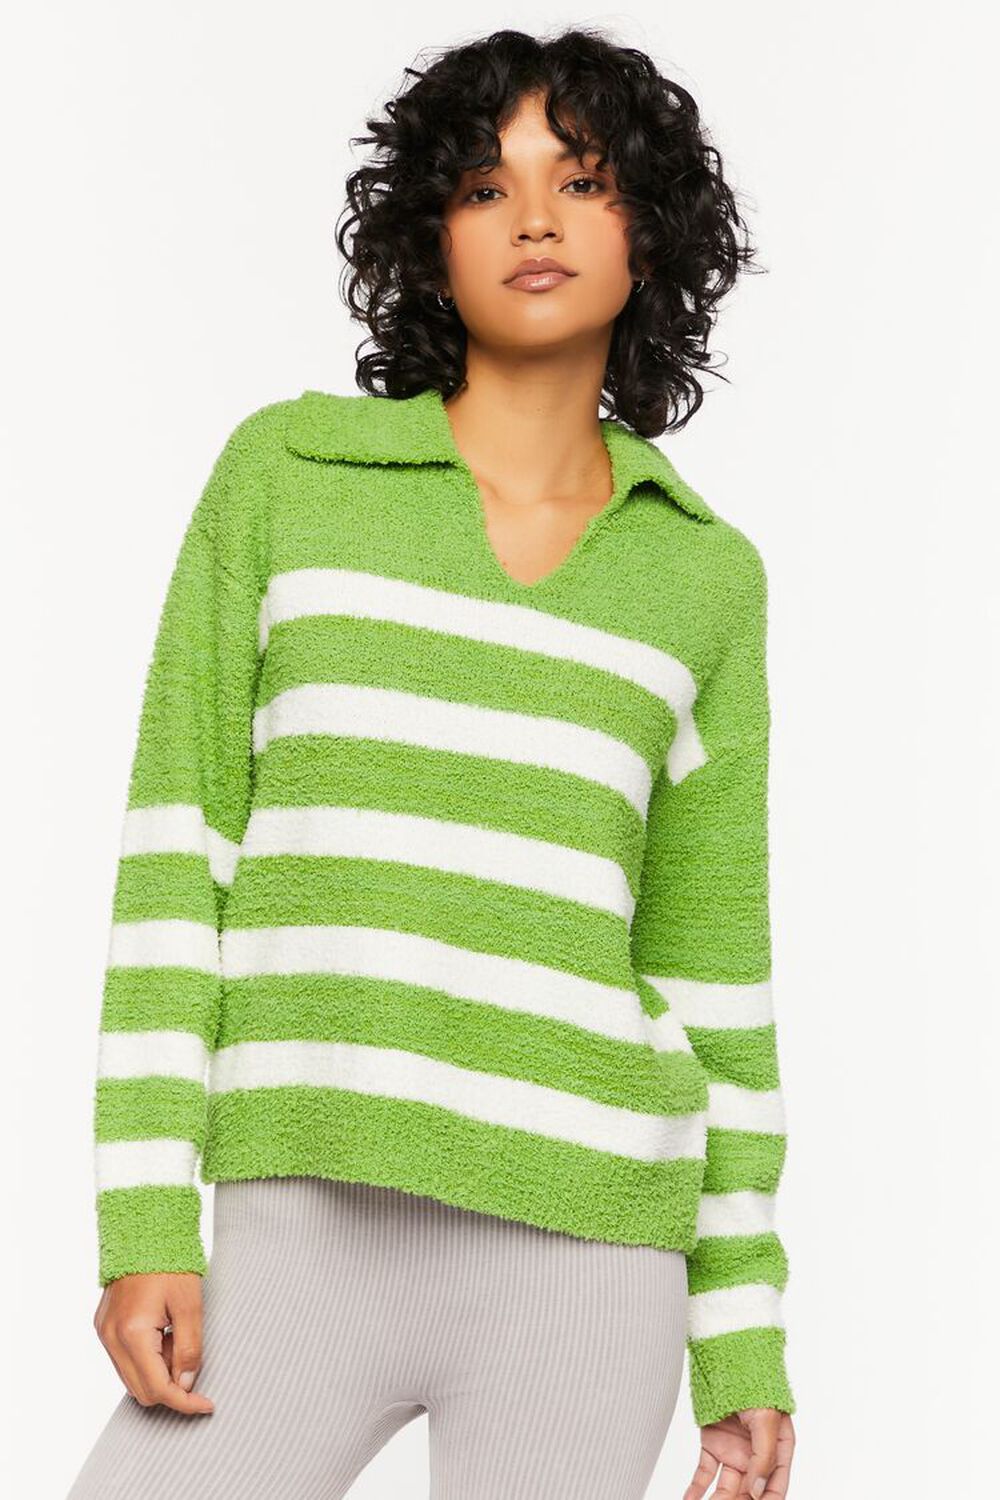 Fuzzy Striped Collared Sweater, image 1